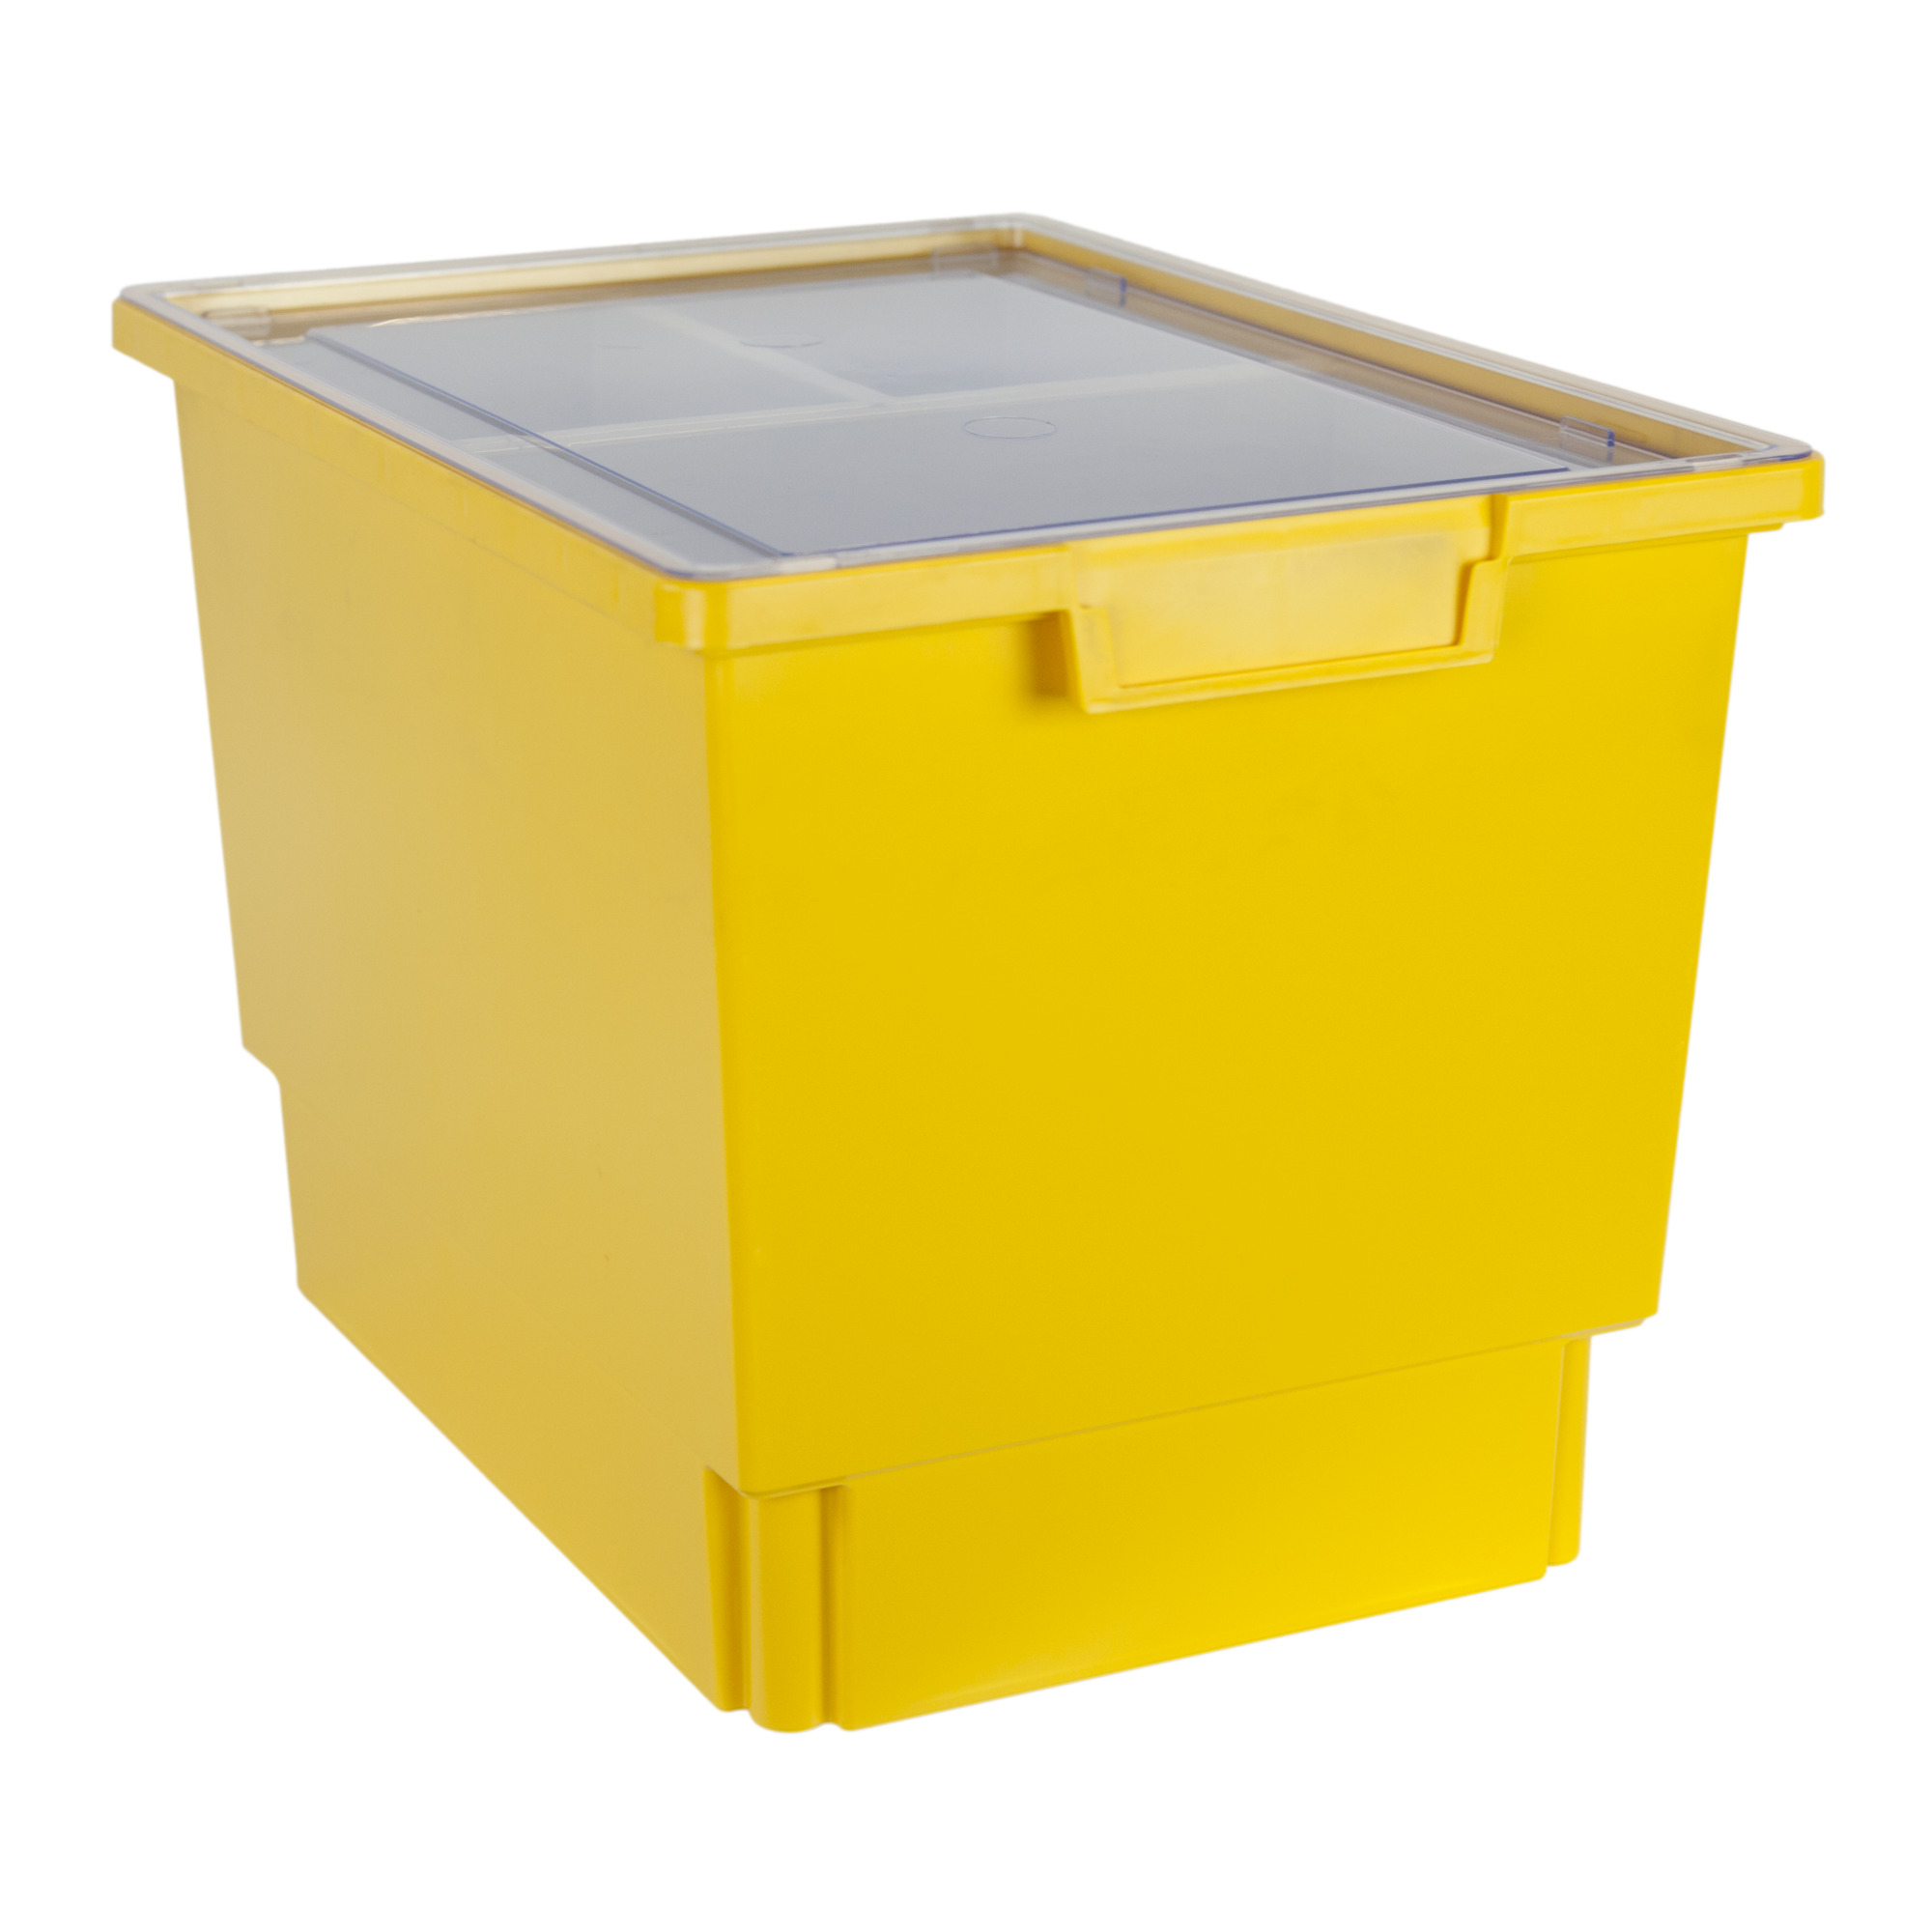 Certwood StorWerks, Slim Line 12Inch Tray Kit (3 x Inserts) Yellow-3PK, Included (qty.) 1, Material Plastic, Height 12 in, Model CE1954PY-NK0004-1